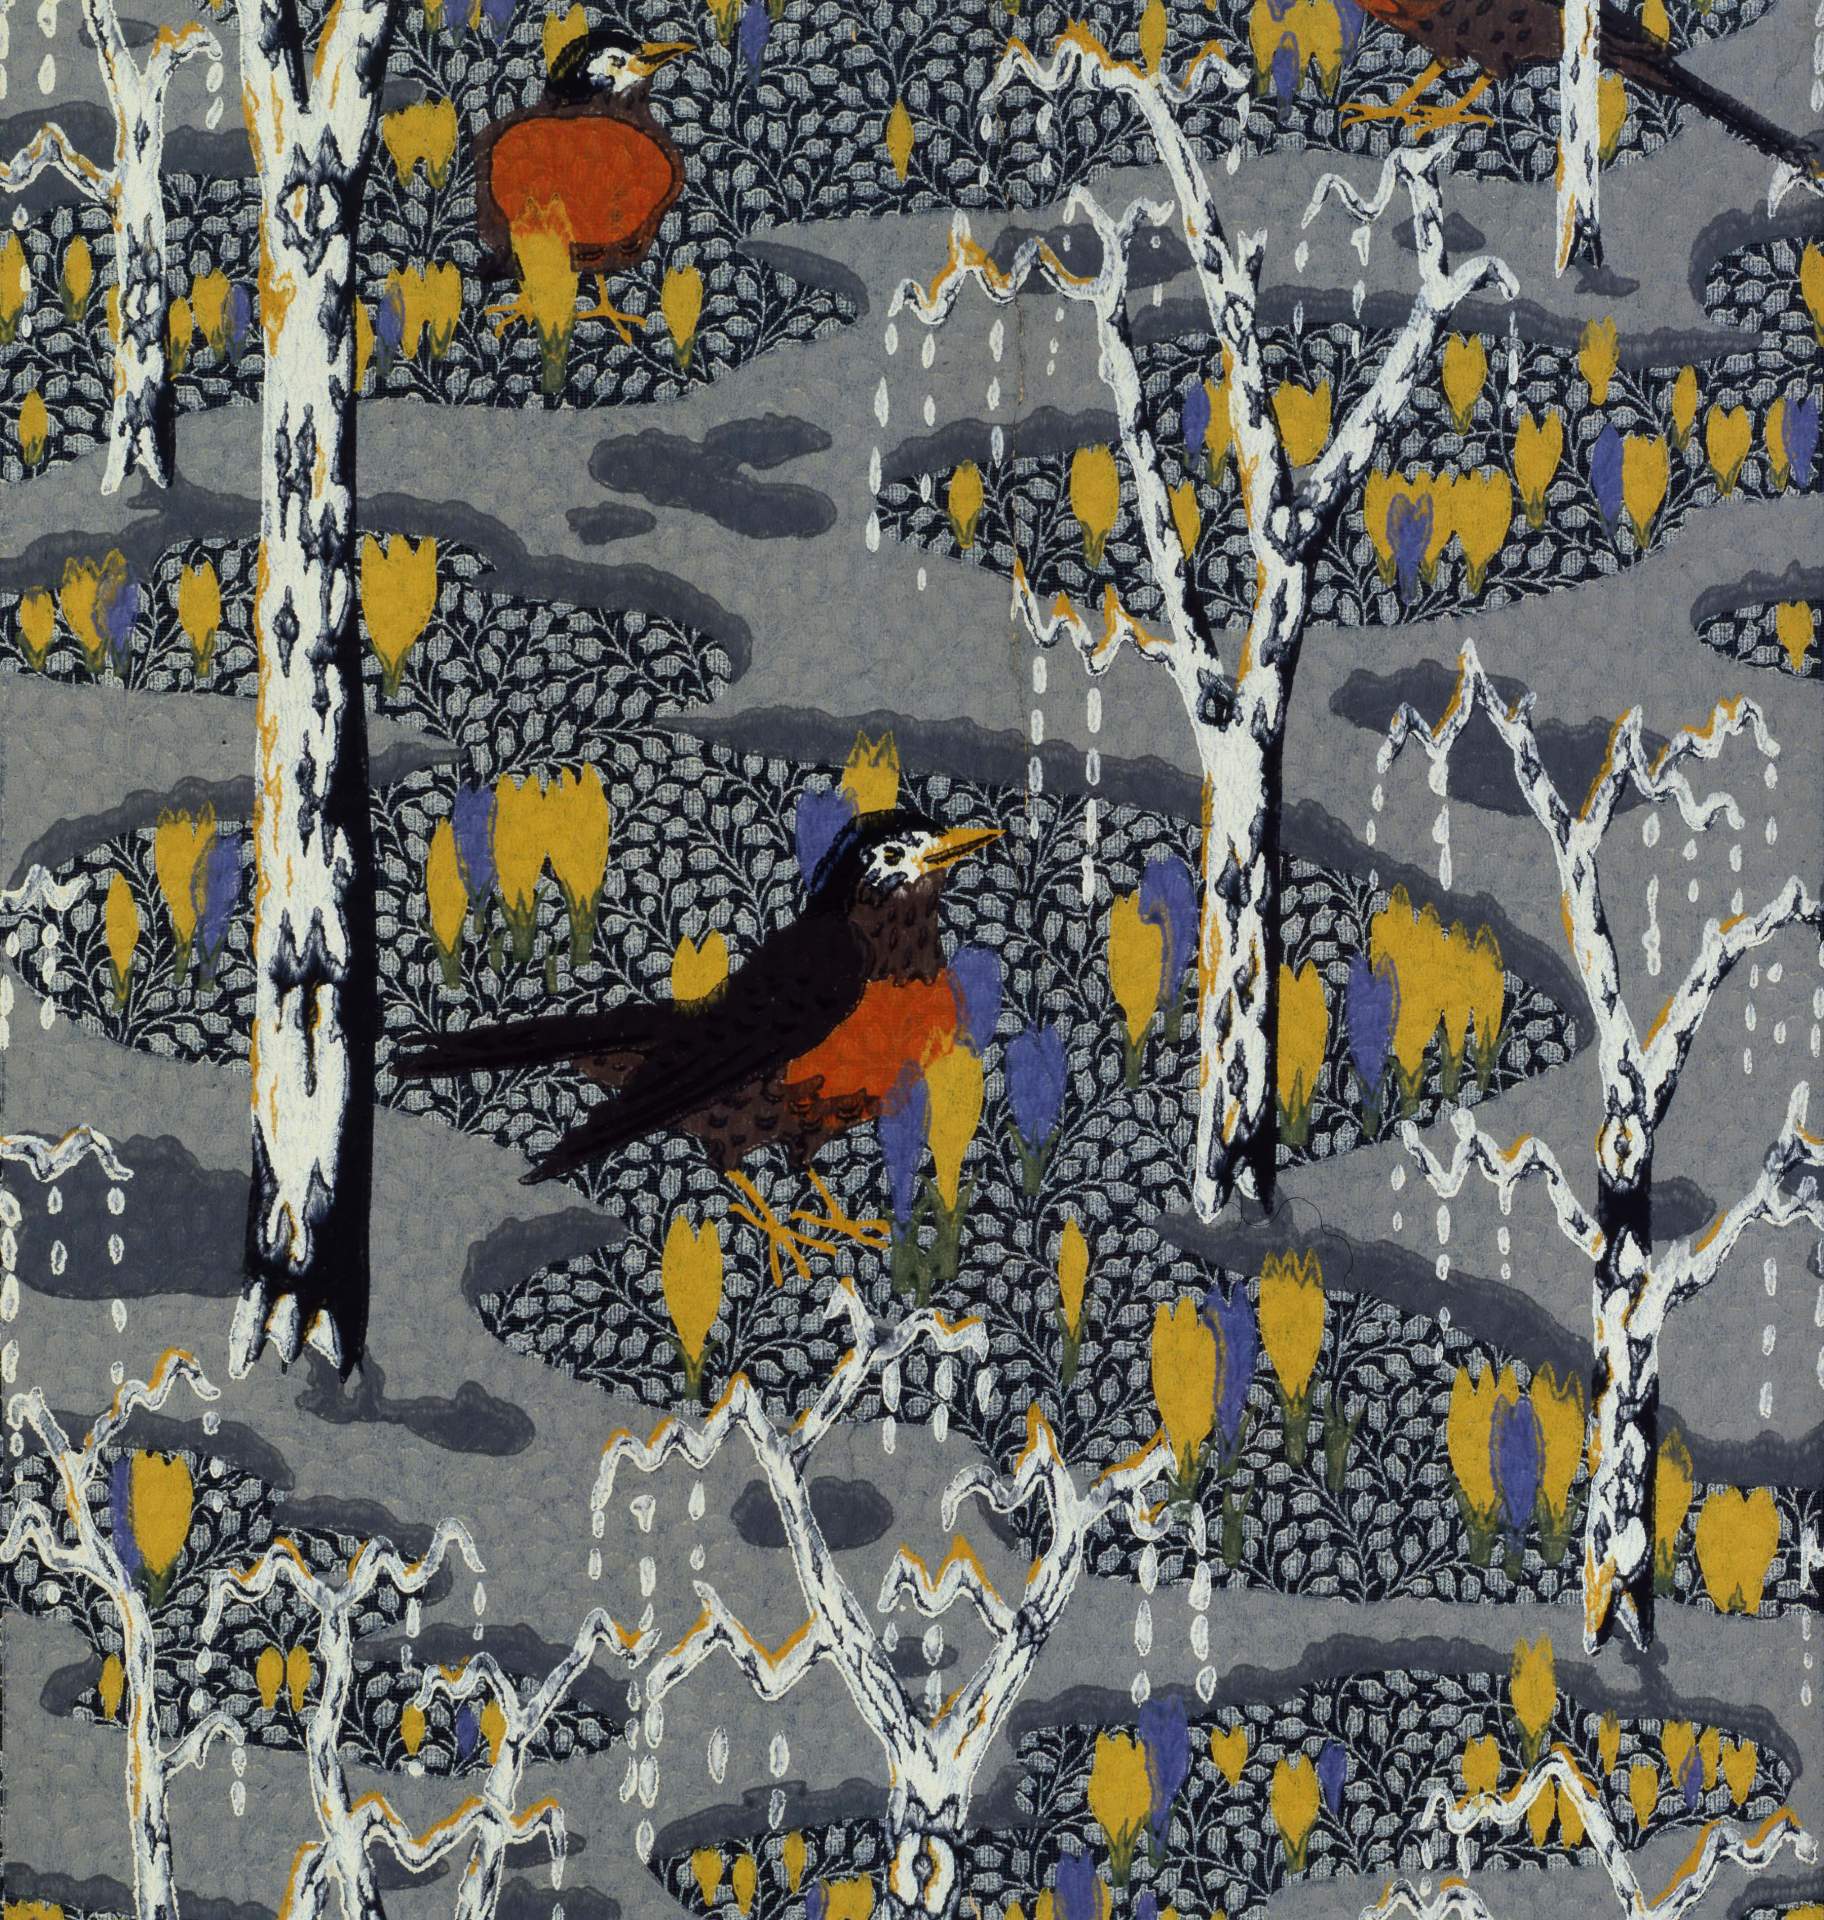 Charles E. Burchfield: By Design on view from September 12 - December 29, 2013